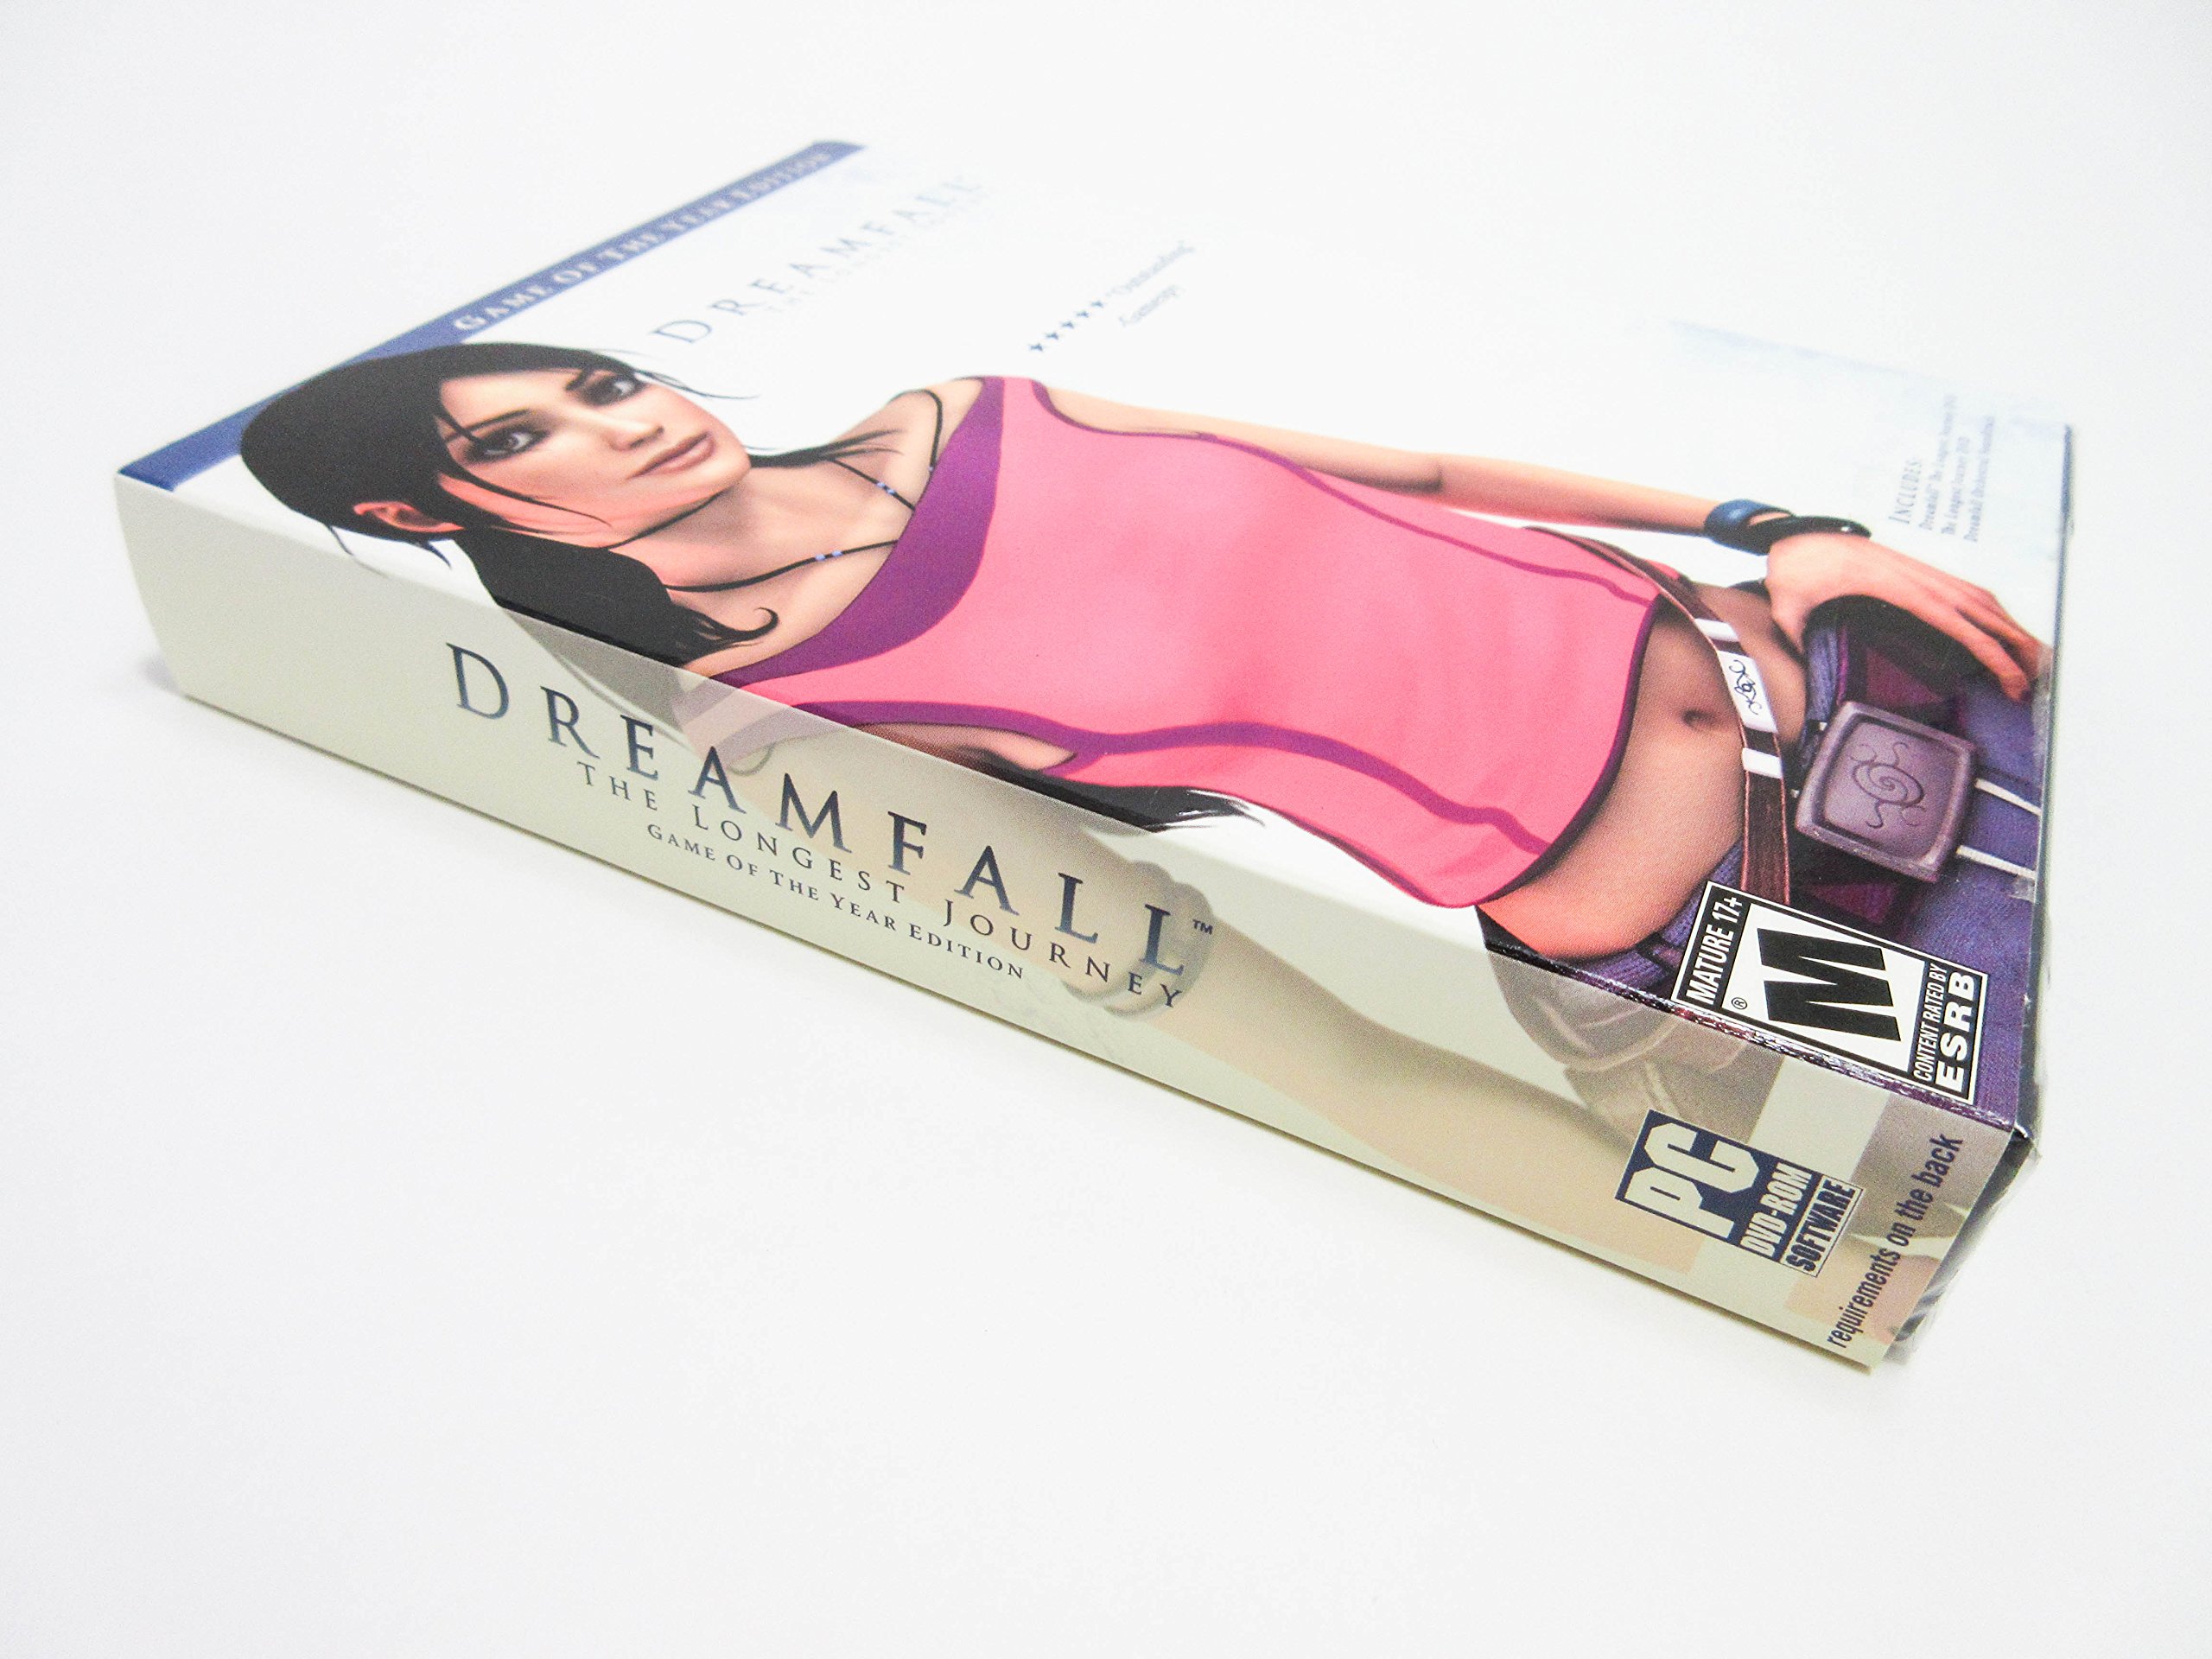 Dreamfall Game of the Year - PC (Jewel case)